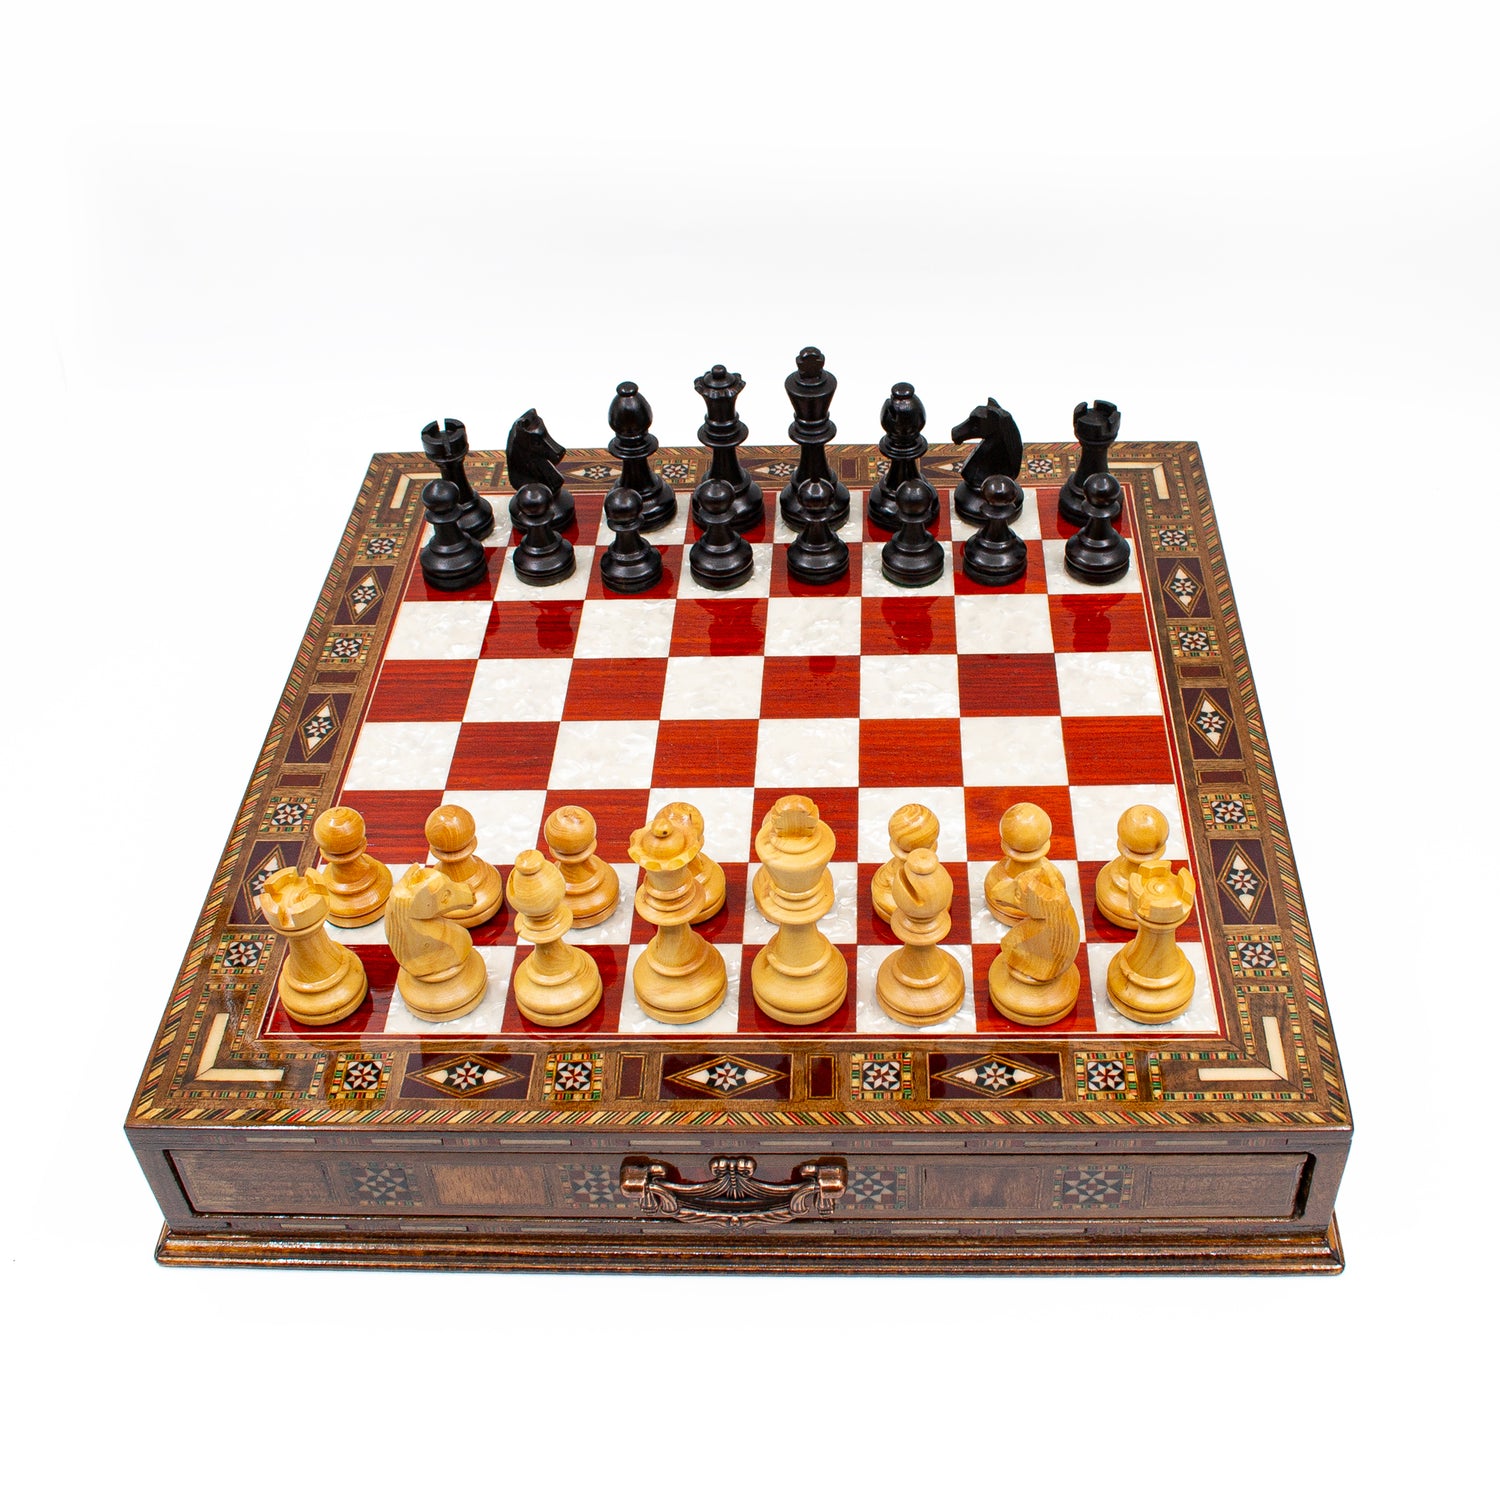 Unique Wooden Chess: Staunton Style with Drawer - Ketohandcraft